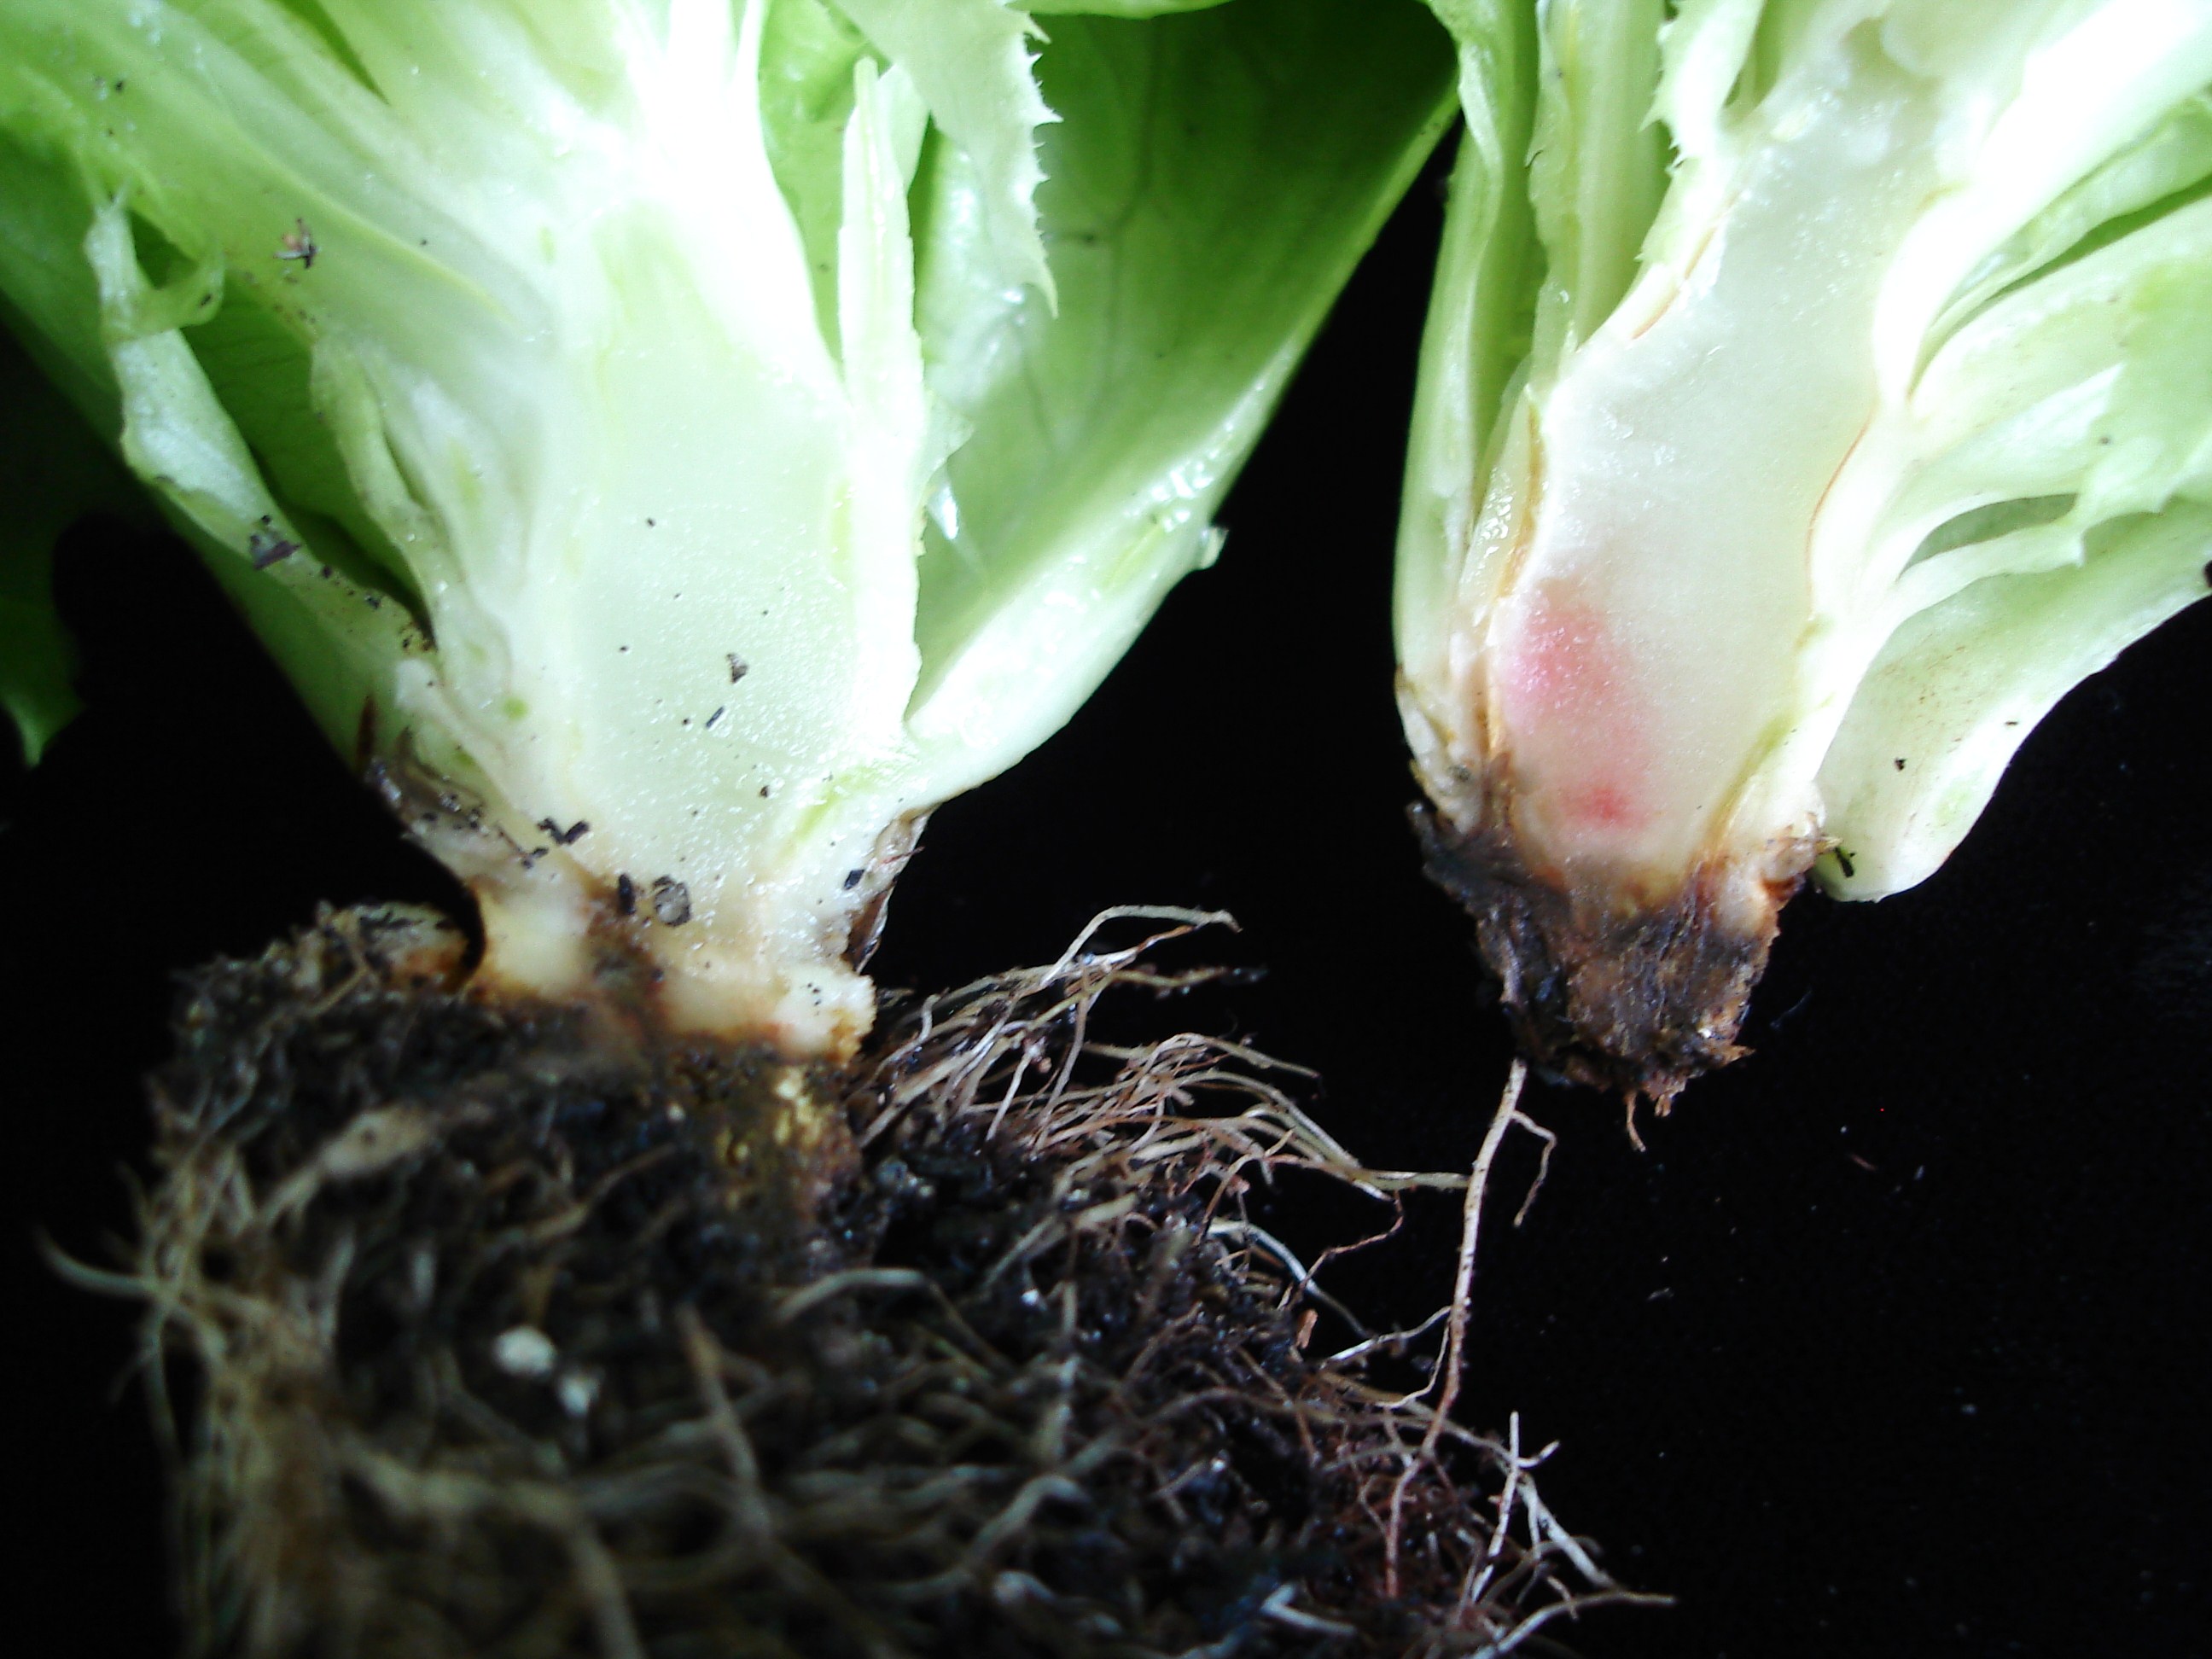 <p><b>Symptom of reddening of the cortex and reduction of the root system. Healthy (left) and diseased (right) plant.</b></p><p>Autor: Jesus G. Töfoli</p>